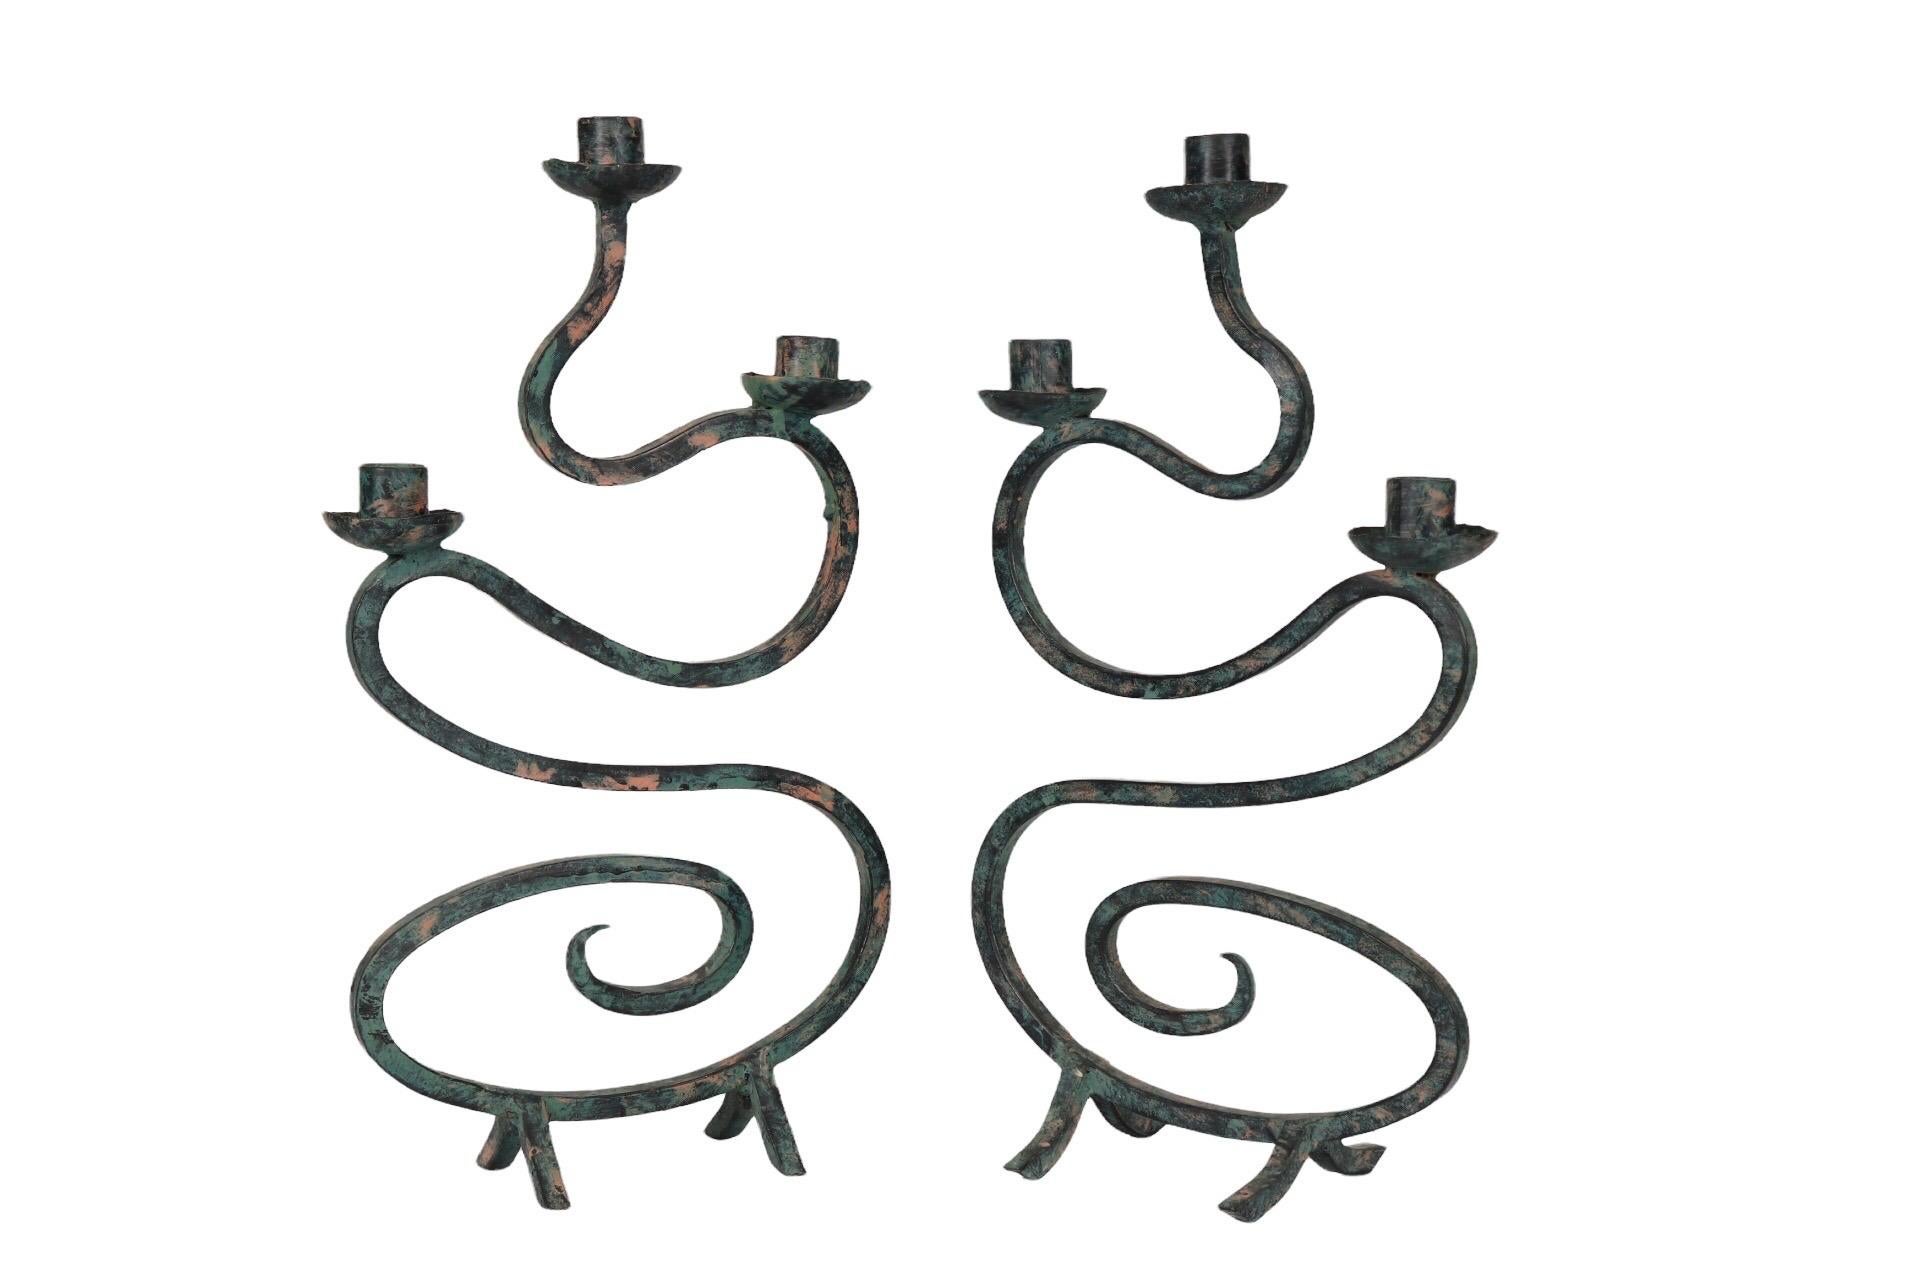 A pair of wrought iron wavy scrolled candelabra. Squared metal supports three bobeche and candle holders, undulating down into a loose scroll, terminating in a sharp point. Stands on splayed metal legs and painted in a verdigris green and copper